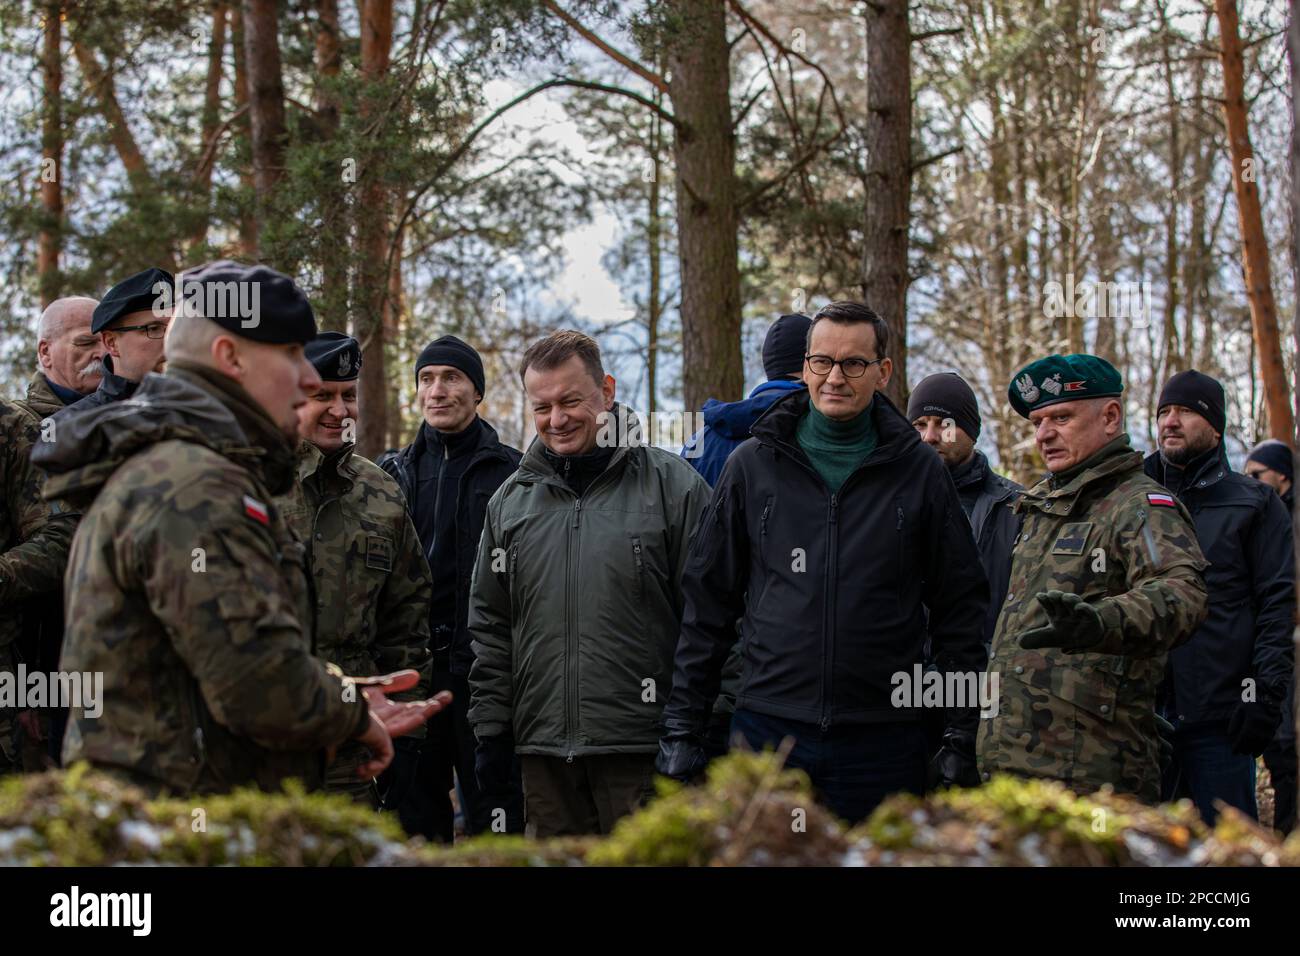 Warsaw, Poland. 12th Mar, 2023. Prime Minister of Poland, Mateusz Morawiecki, 2nd right, and Minister of National Defense, Mariusz Błaszczak, center, observe survival tactic demonstrations during the Train with NATO event, March 12, 2023 in Warsaw, Poland. Credit: Sgt. Lianne Hirano/U.S Army/Alamy Live News Stock Photo